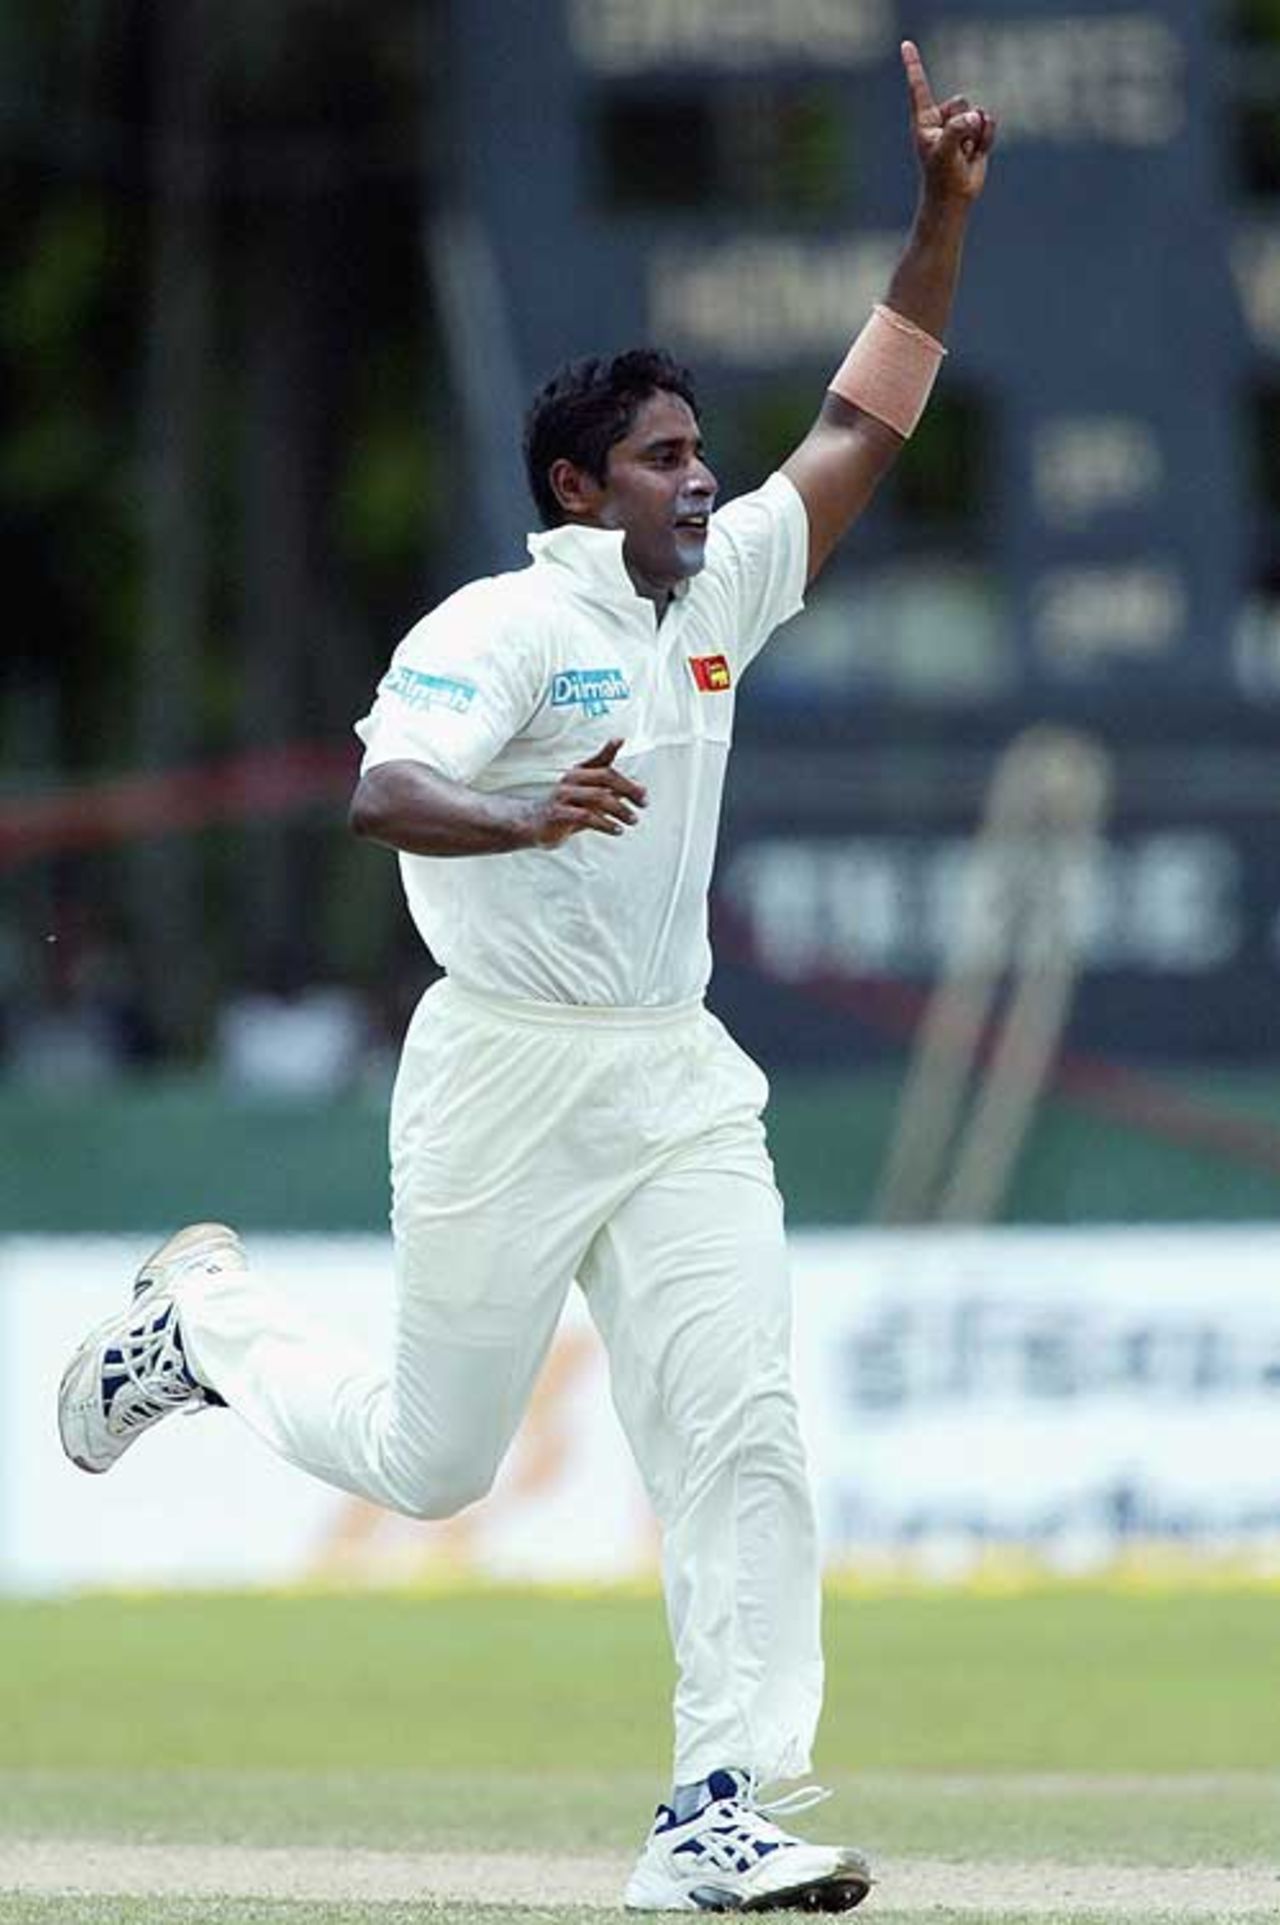 Chaminda Vaas celebrates a wicket, Sri Lanka v South Africa, 2nd Test, 4th day, Colombo, August 14, 2004